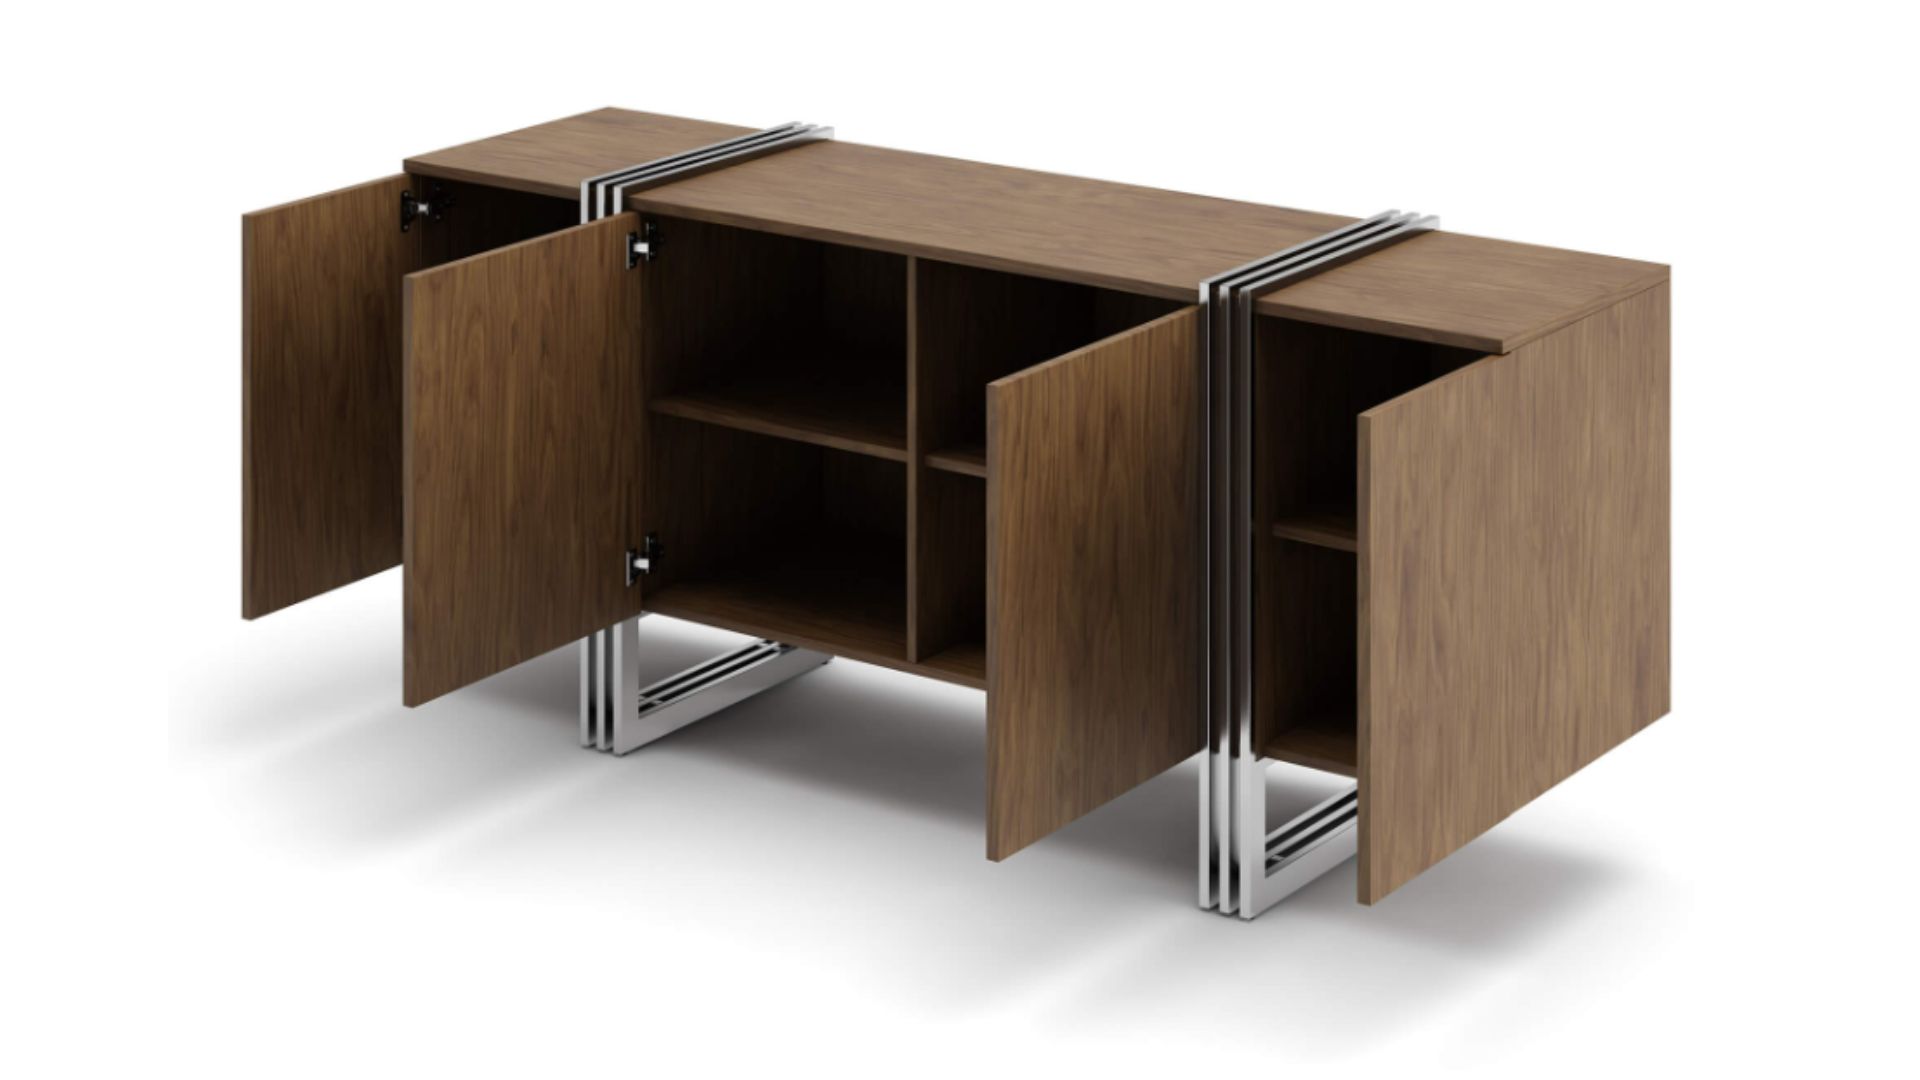 3D modeling for modern, minimalist wooden sideboard or cabinet with two sections